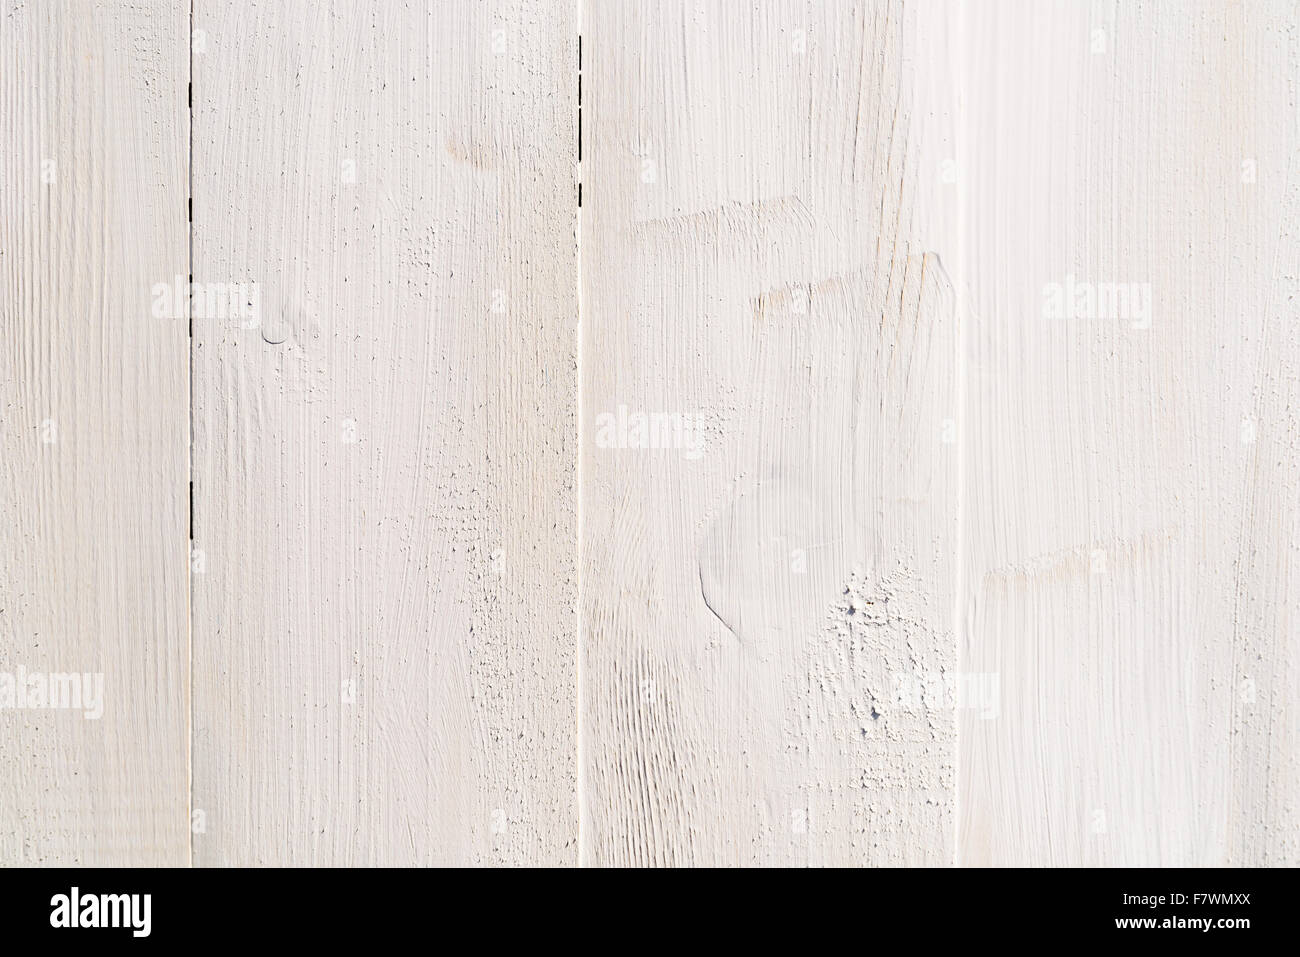 Vintage And Dirty White Wood Boards Stock Photo